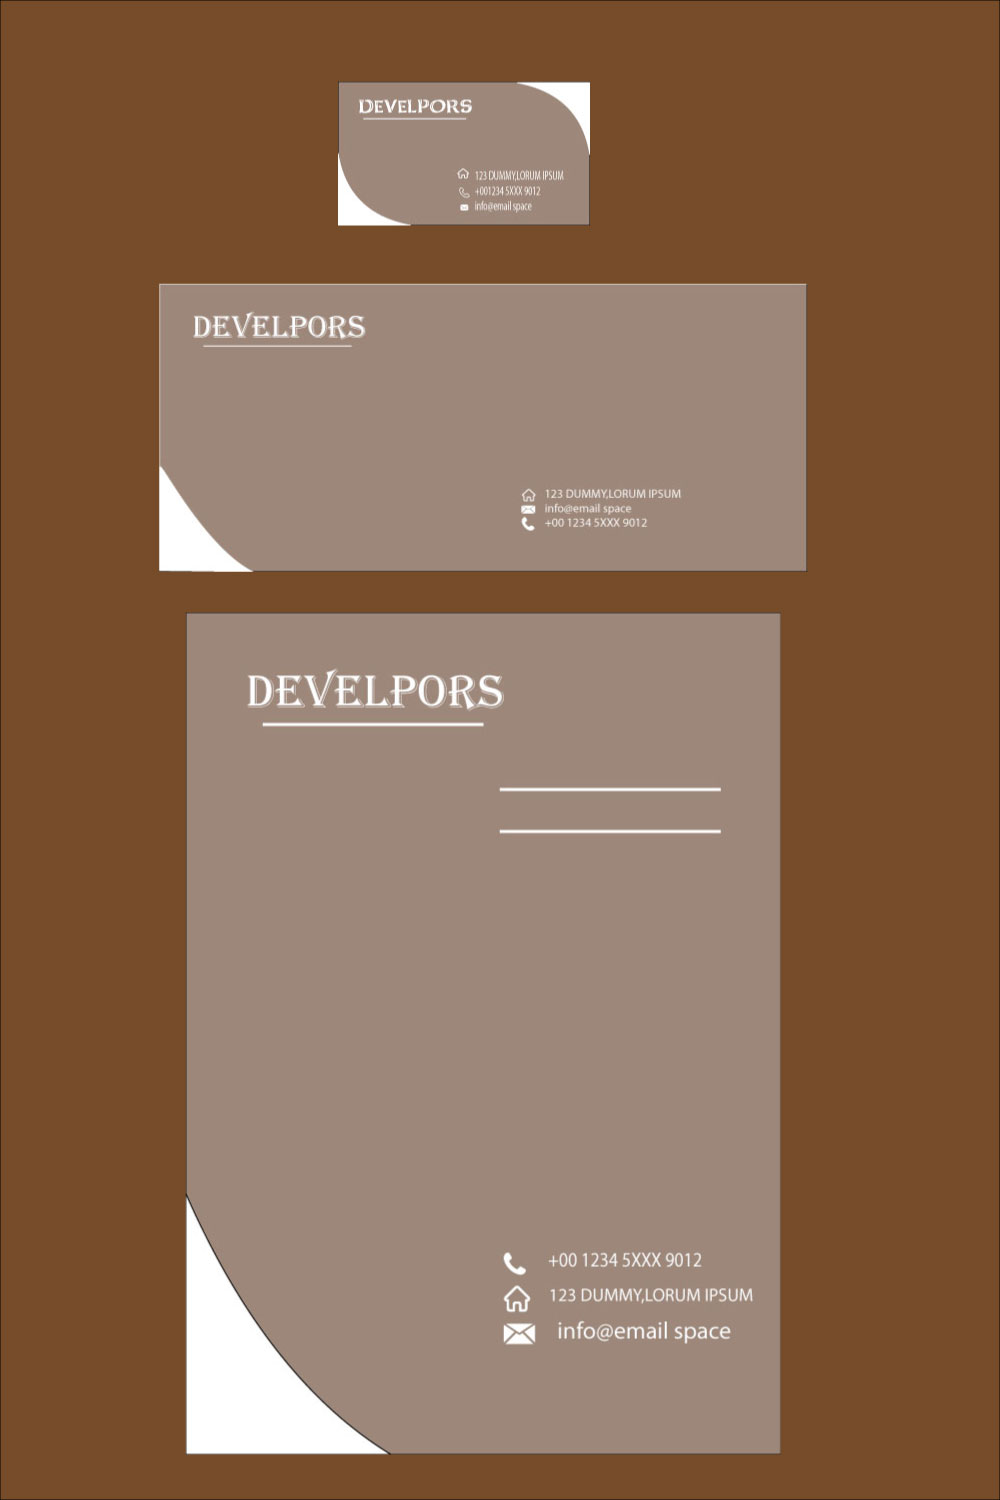 Business Card Design with Letter Head and Envelope pinterest image.